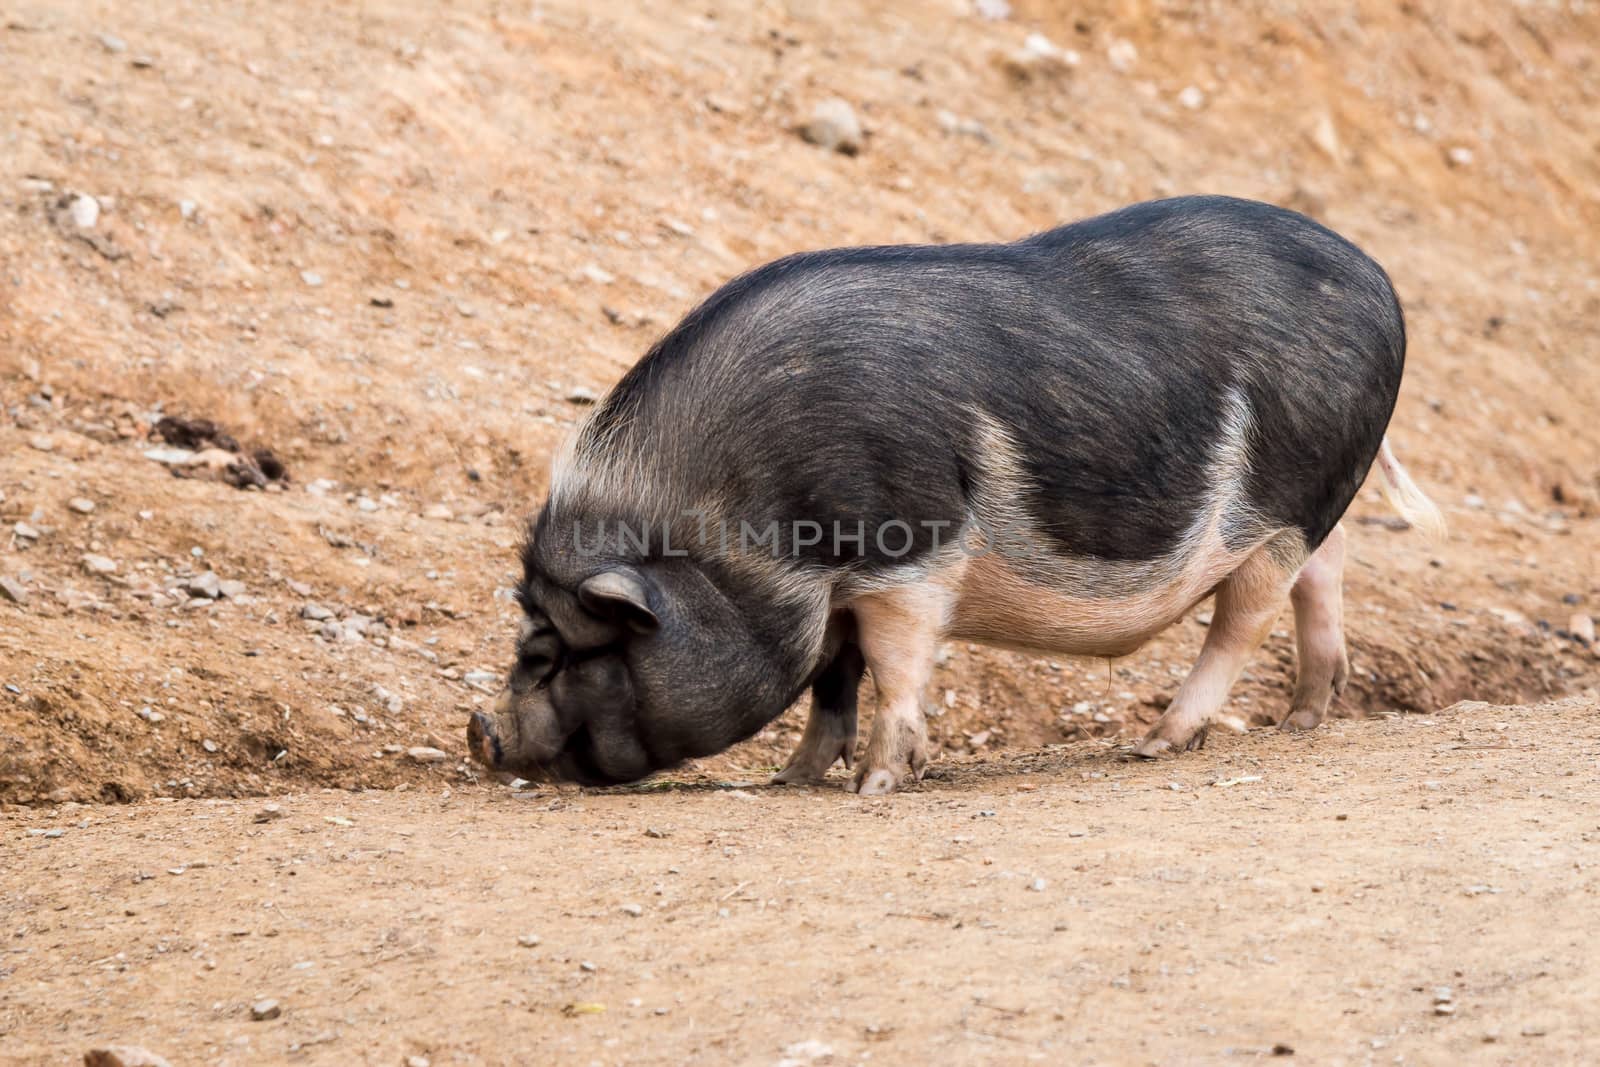 Pot-bellied pig looking for food